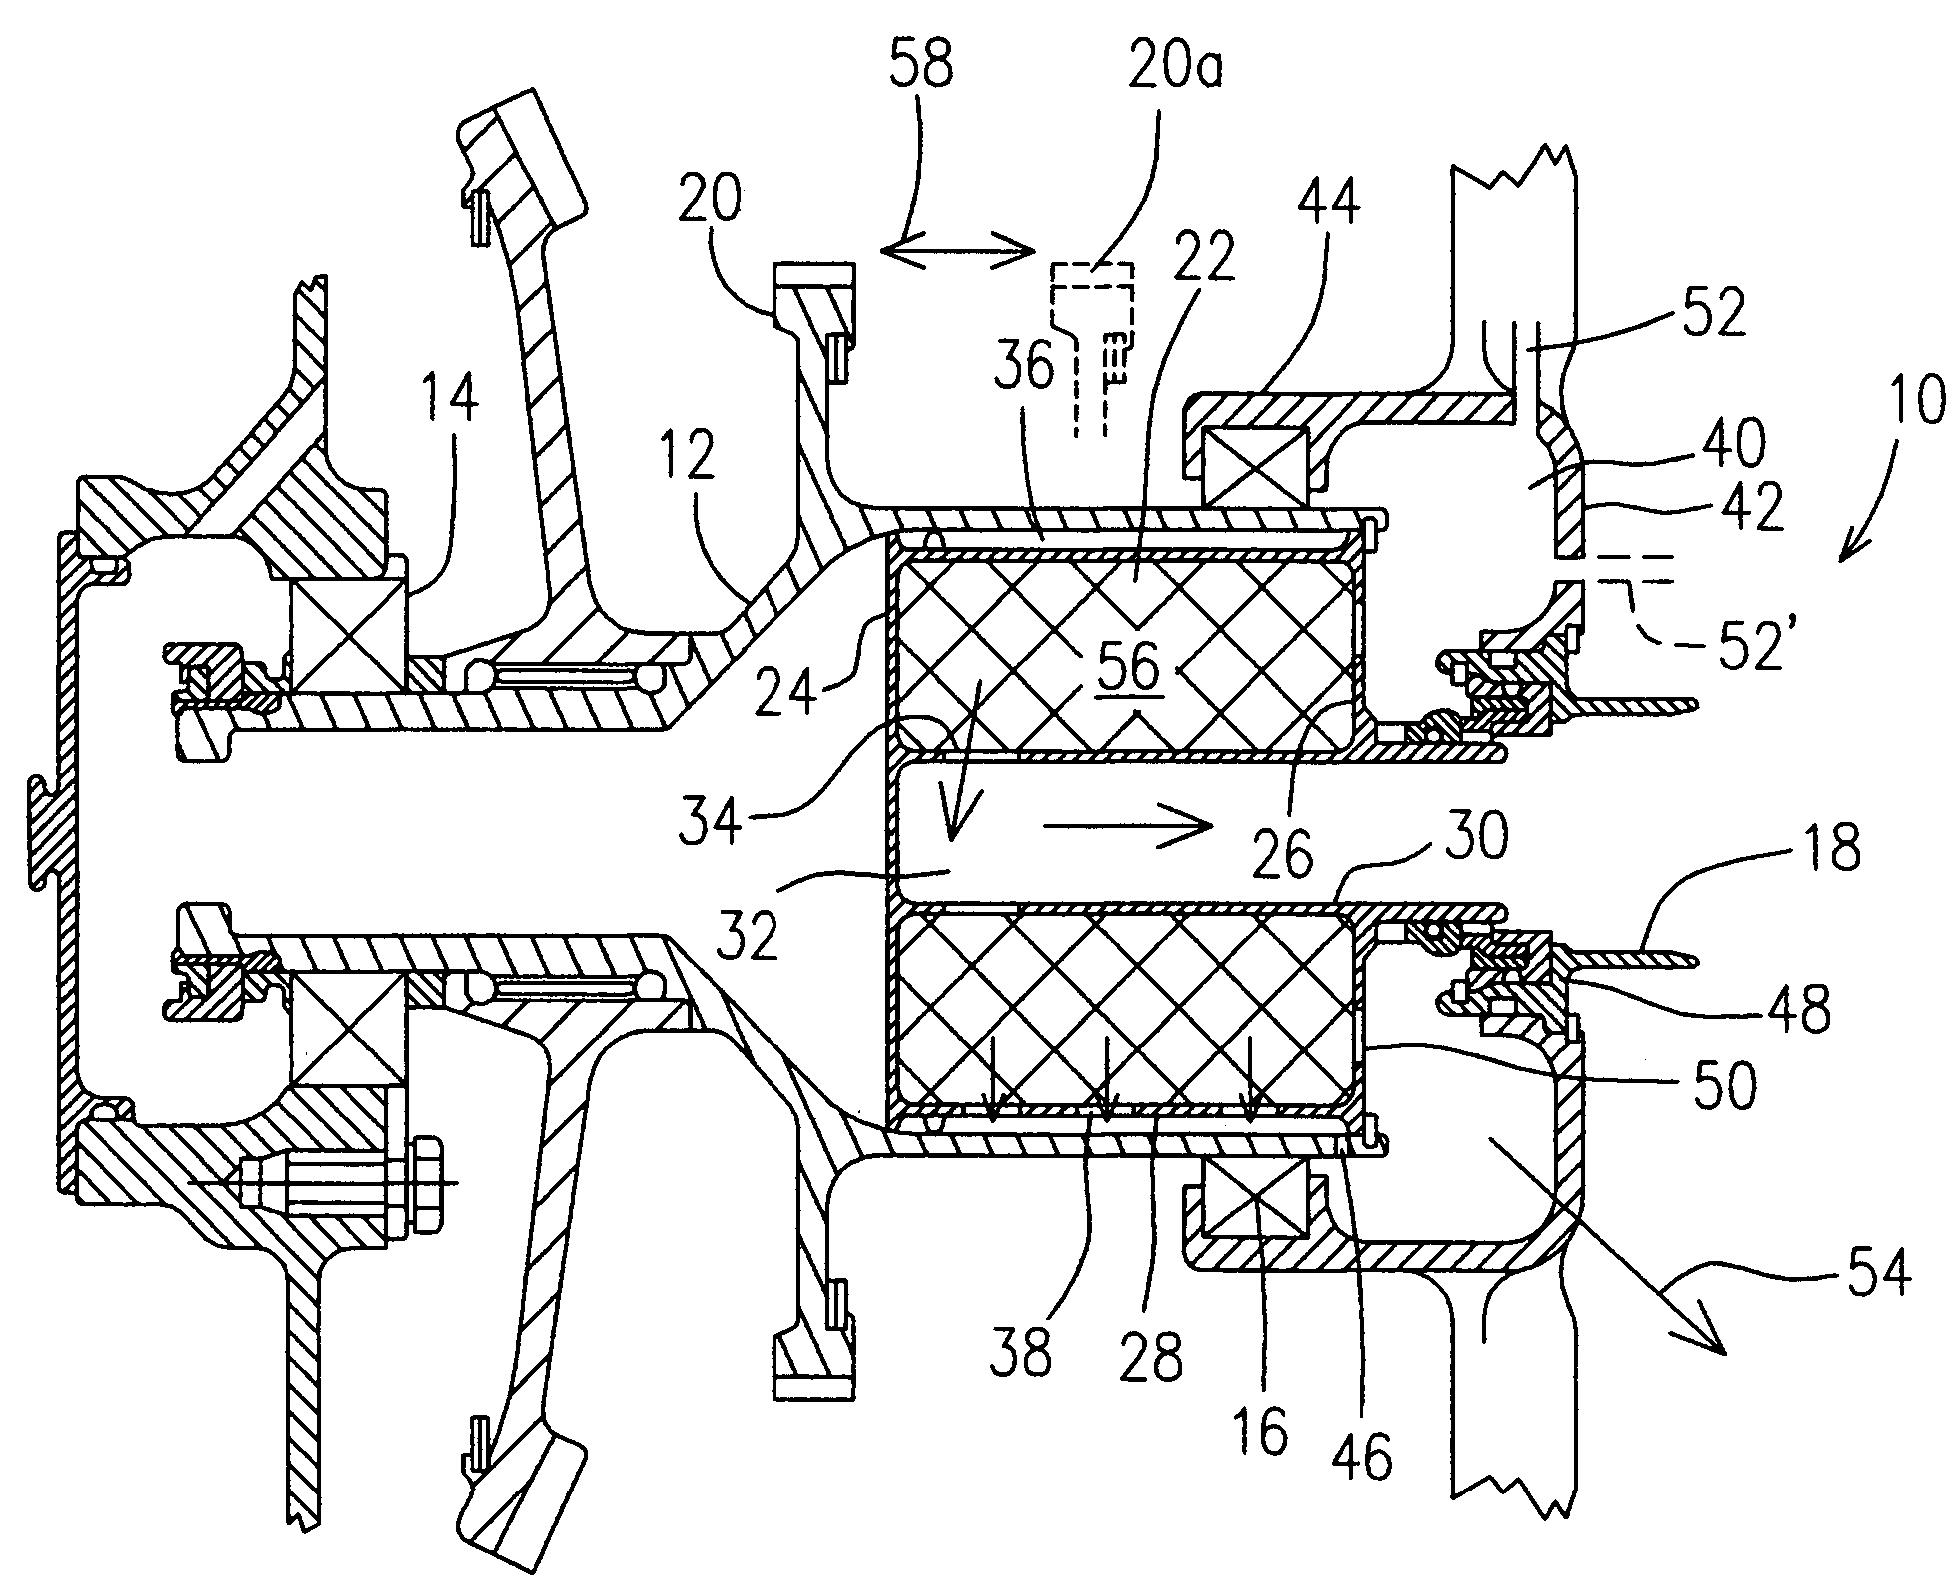 Air/oil separation system and method